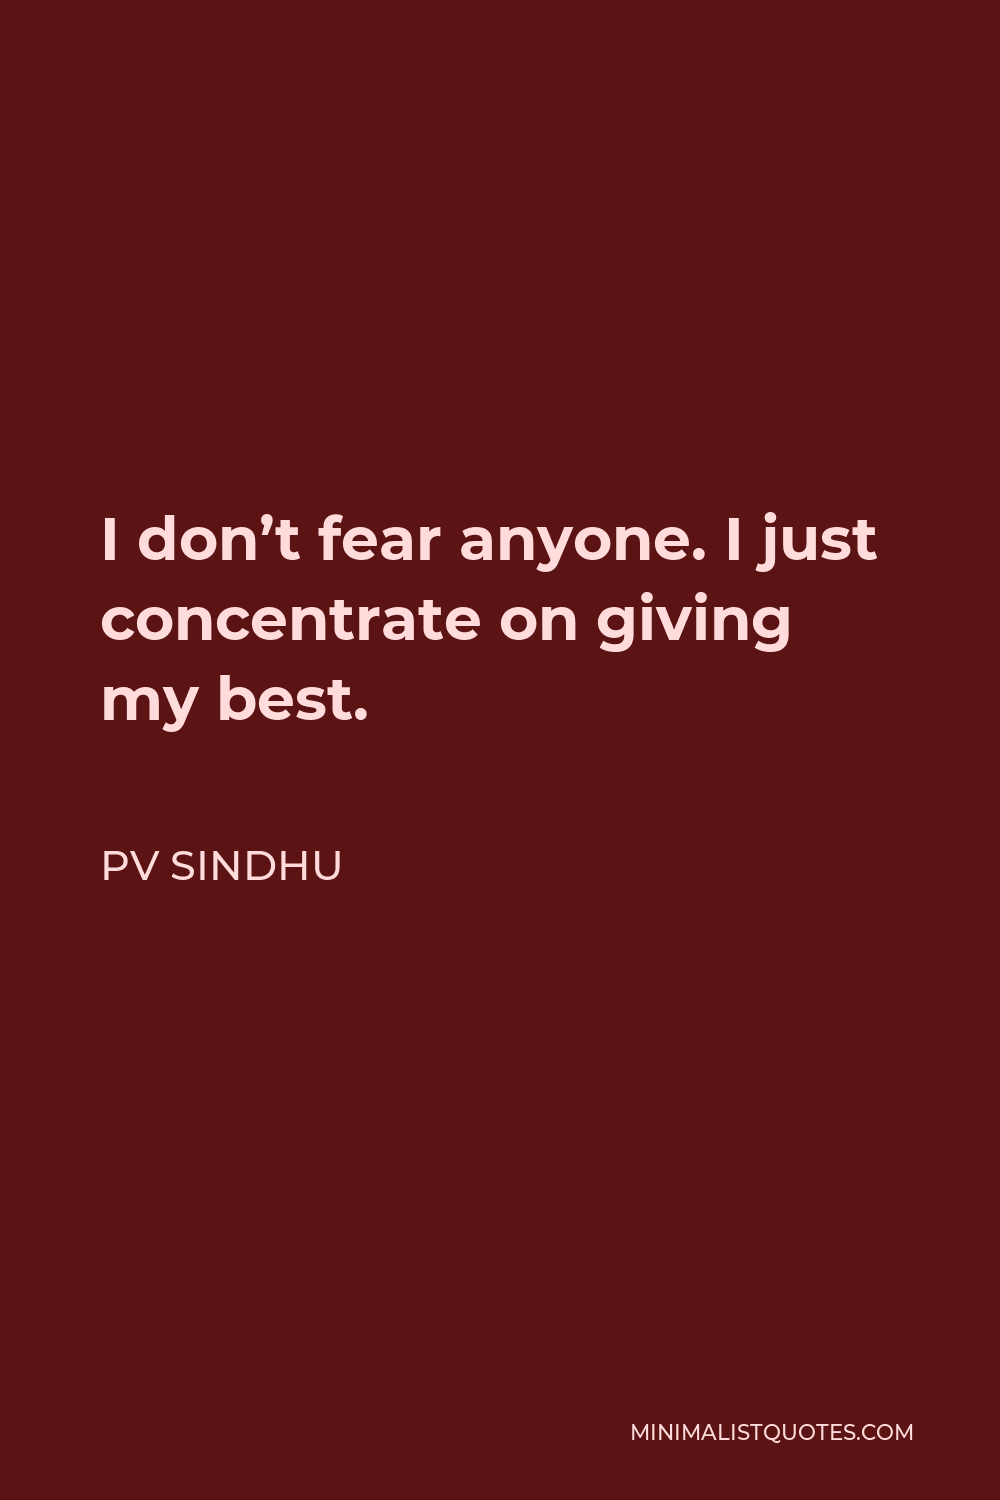 PV Sindhu Quote: I don’t fear anyone. I just concentrate